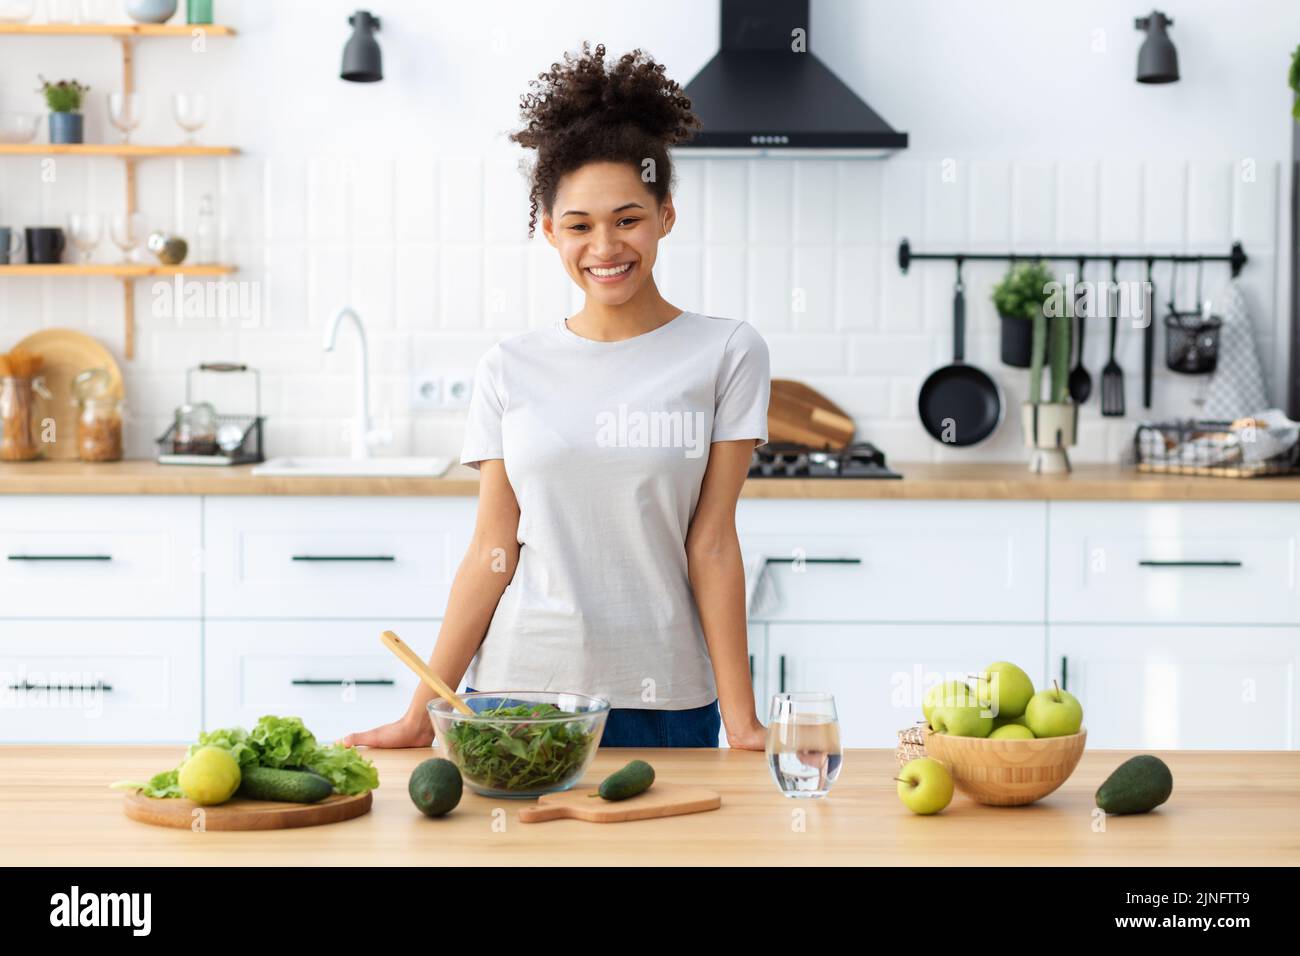 Healthy diet eating African American young female preparing salad in home kitchen woman cooking healthy food Stock Photo